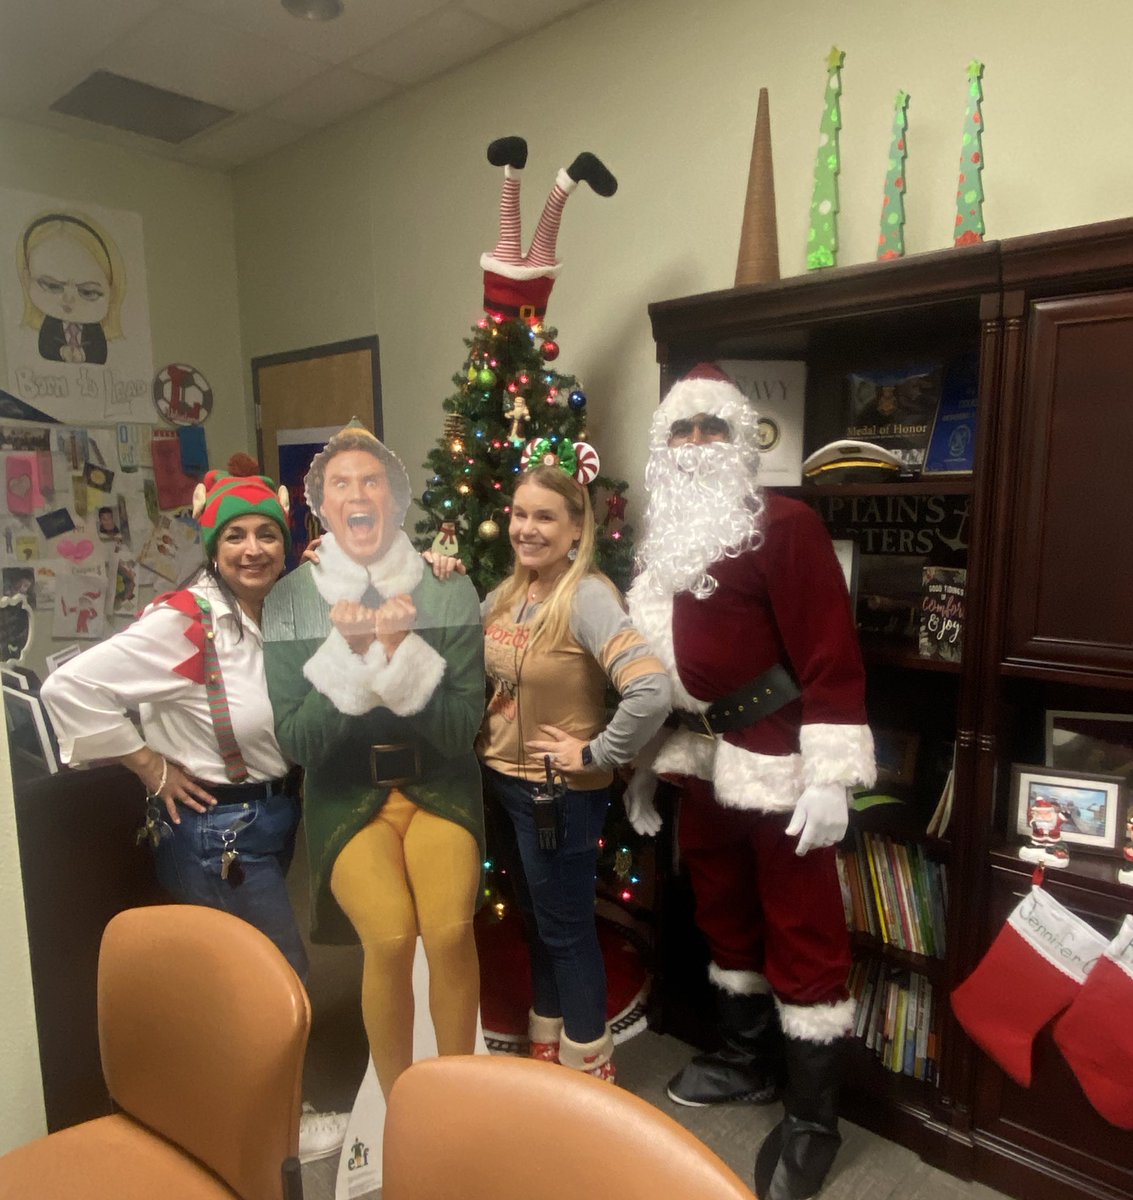 I adore this team! There is nothing these 2 APs won’t do to make this holiday season merry and bright for our community! Pretty sure that elf and Santa duties weren’t in the job description, but they do it with a smile! #blessedprincipal